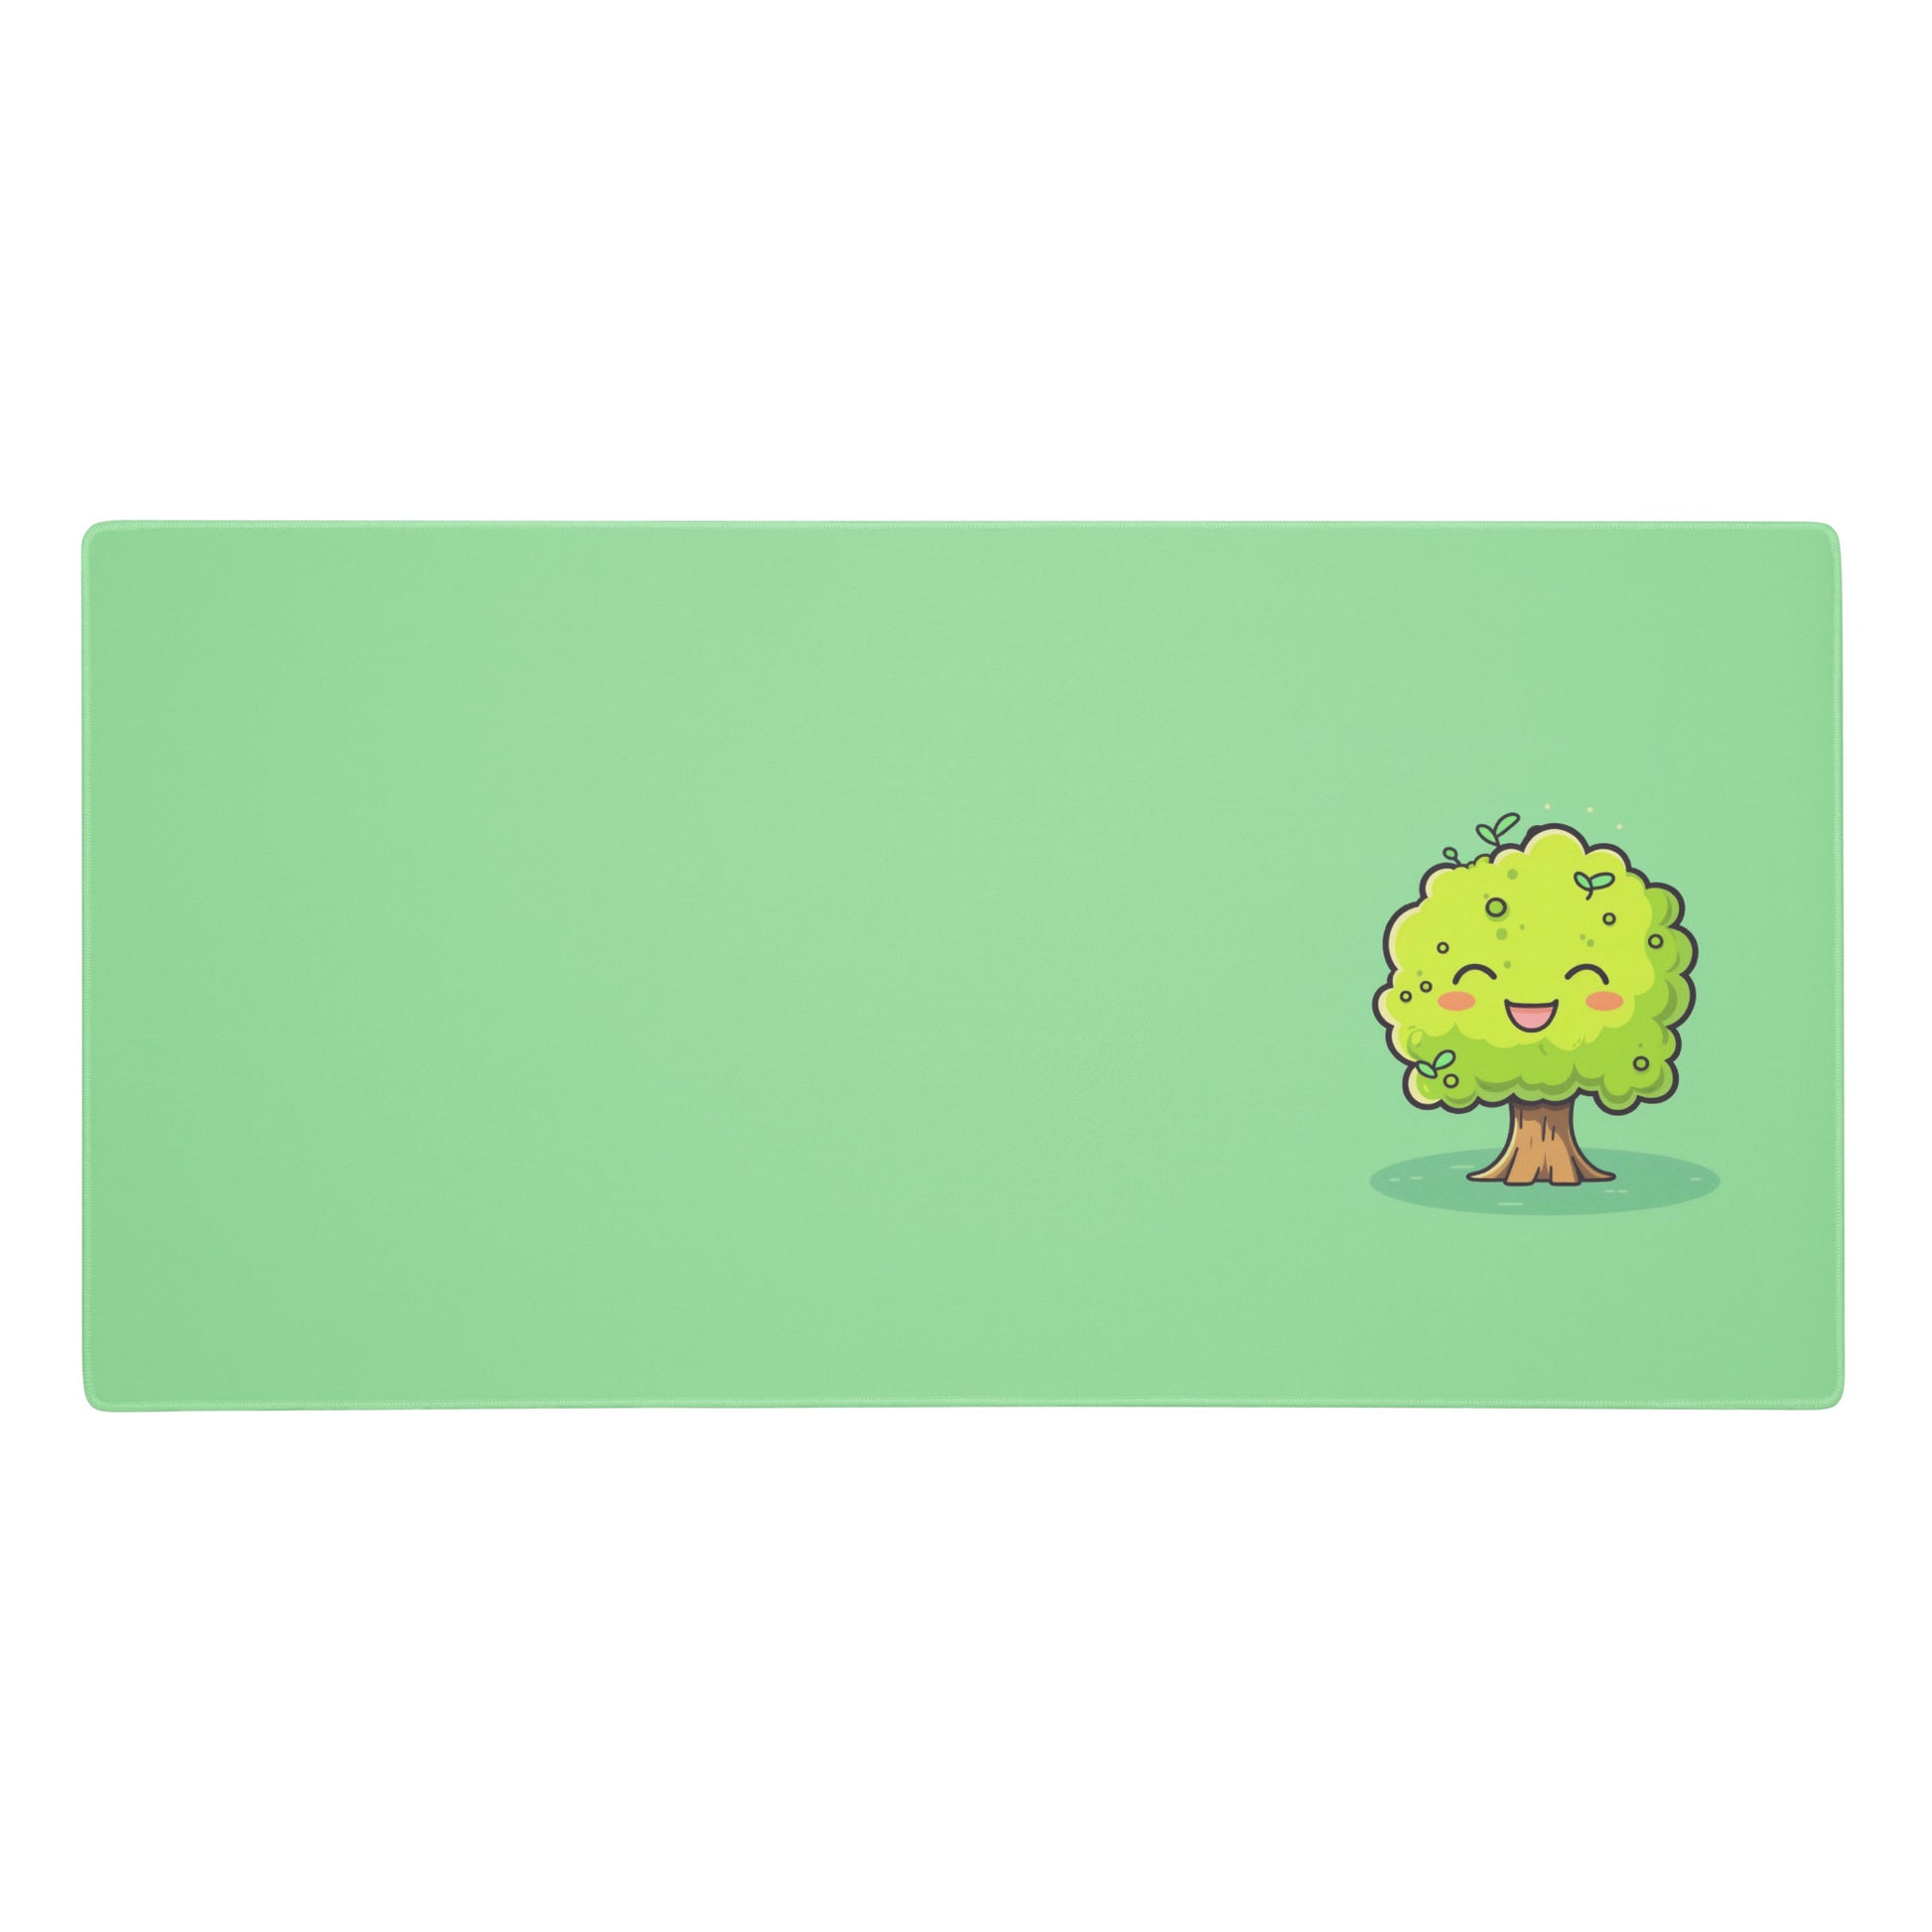 A 36" x 18" desk pad with a cute tree on it. Green in color.